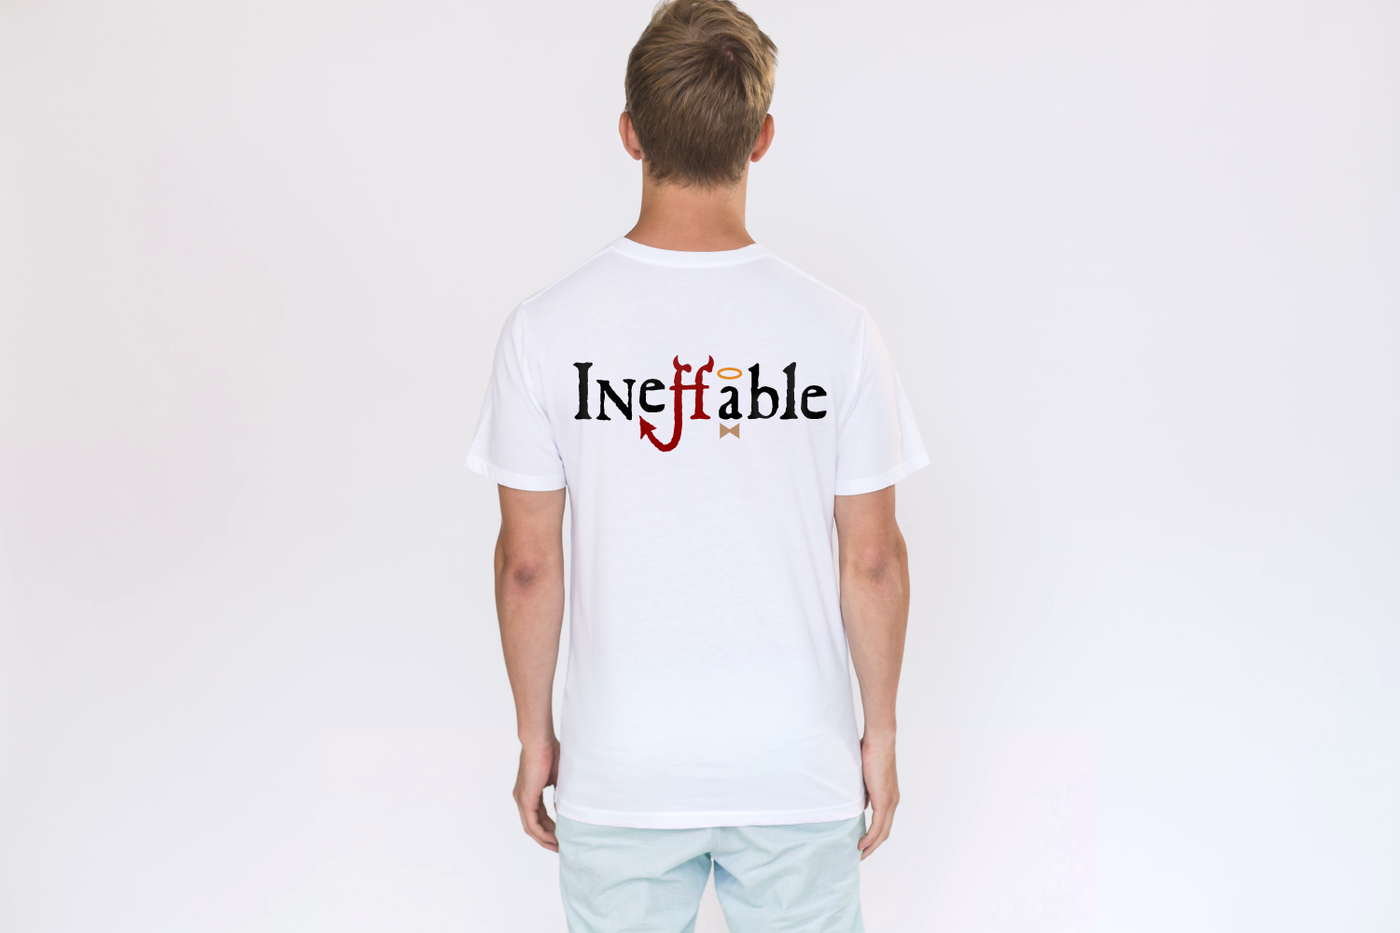 White man facing a white wall, visible from the back. His white tee has the word "Ineffable" on it. The fs have devil horns and a tail, and the a has a halo and bow tie.